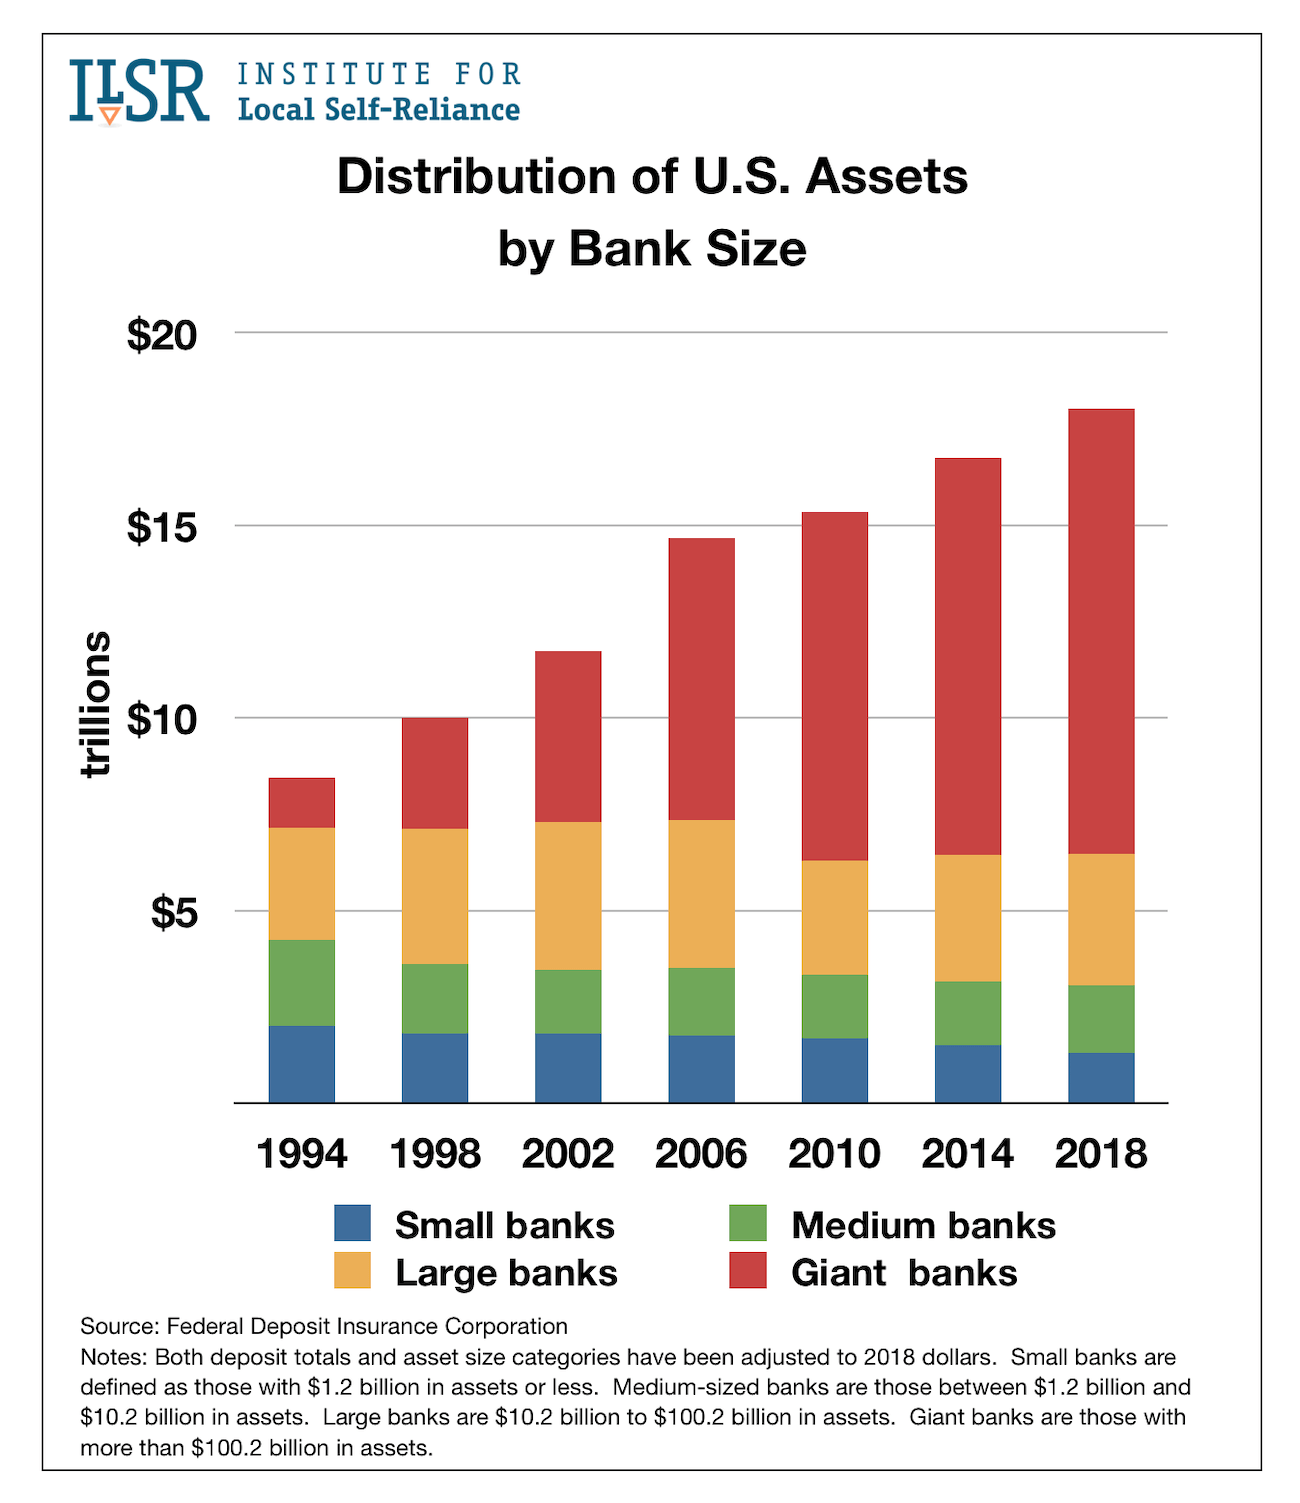 Distribution of Deposits and Assets by Size of Bank, 1994-2018